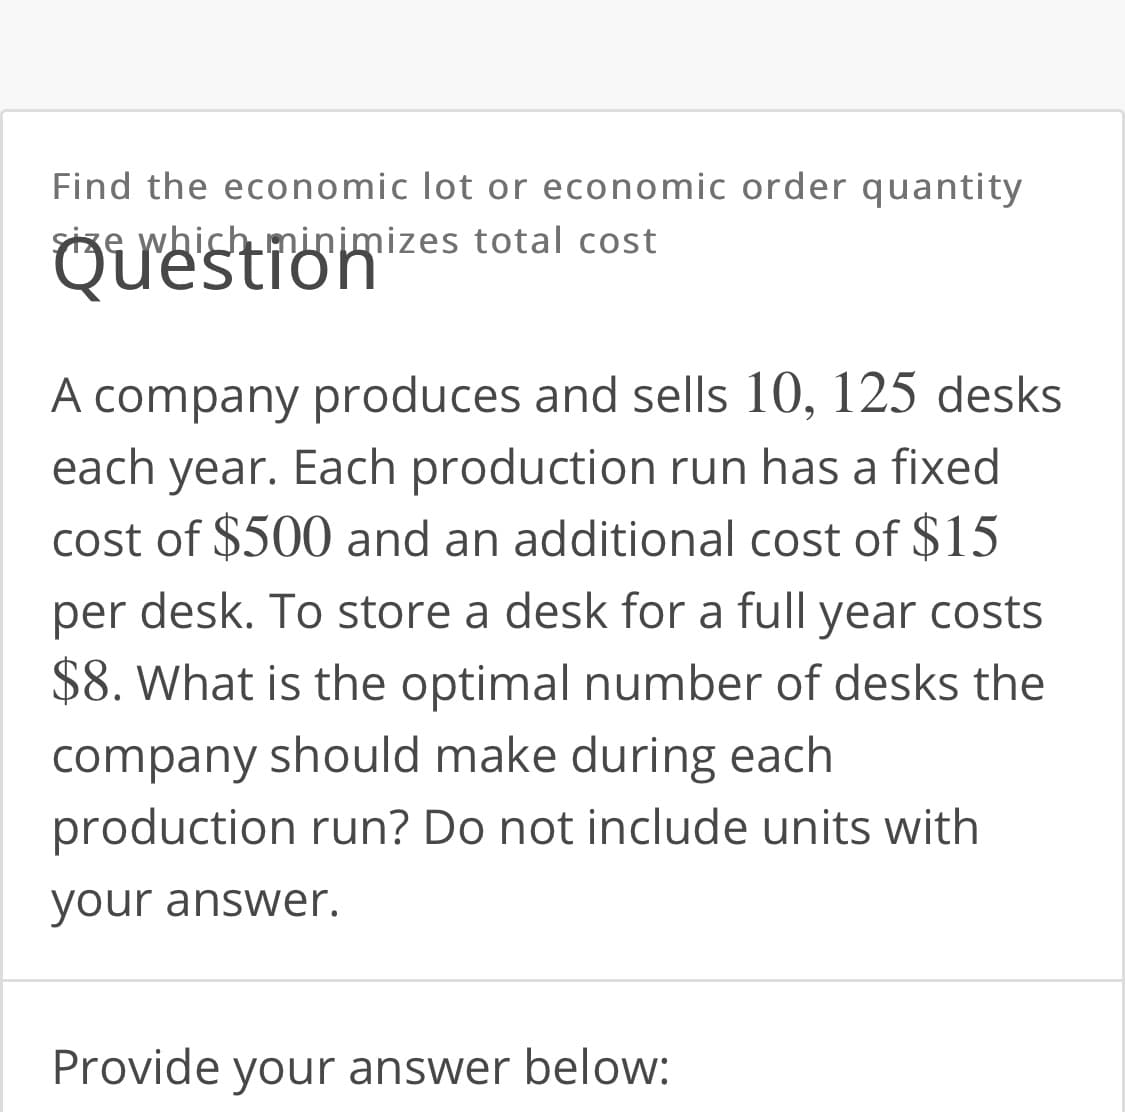 Find the economic lot or economic order quantity
Size which minimizes total cost
Question
A company produces and sells 10, 125 desks
each year. Each production run has a fixed
cost of $500 and an additional cost of $15
per
desk. To store a desk for a full year costs
$8. What is the optimal number of desks the
company should make during each
production run? Do not include units with
your answer.
Provide your answer below:
